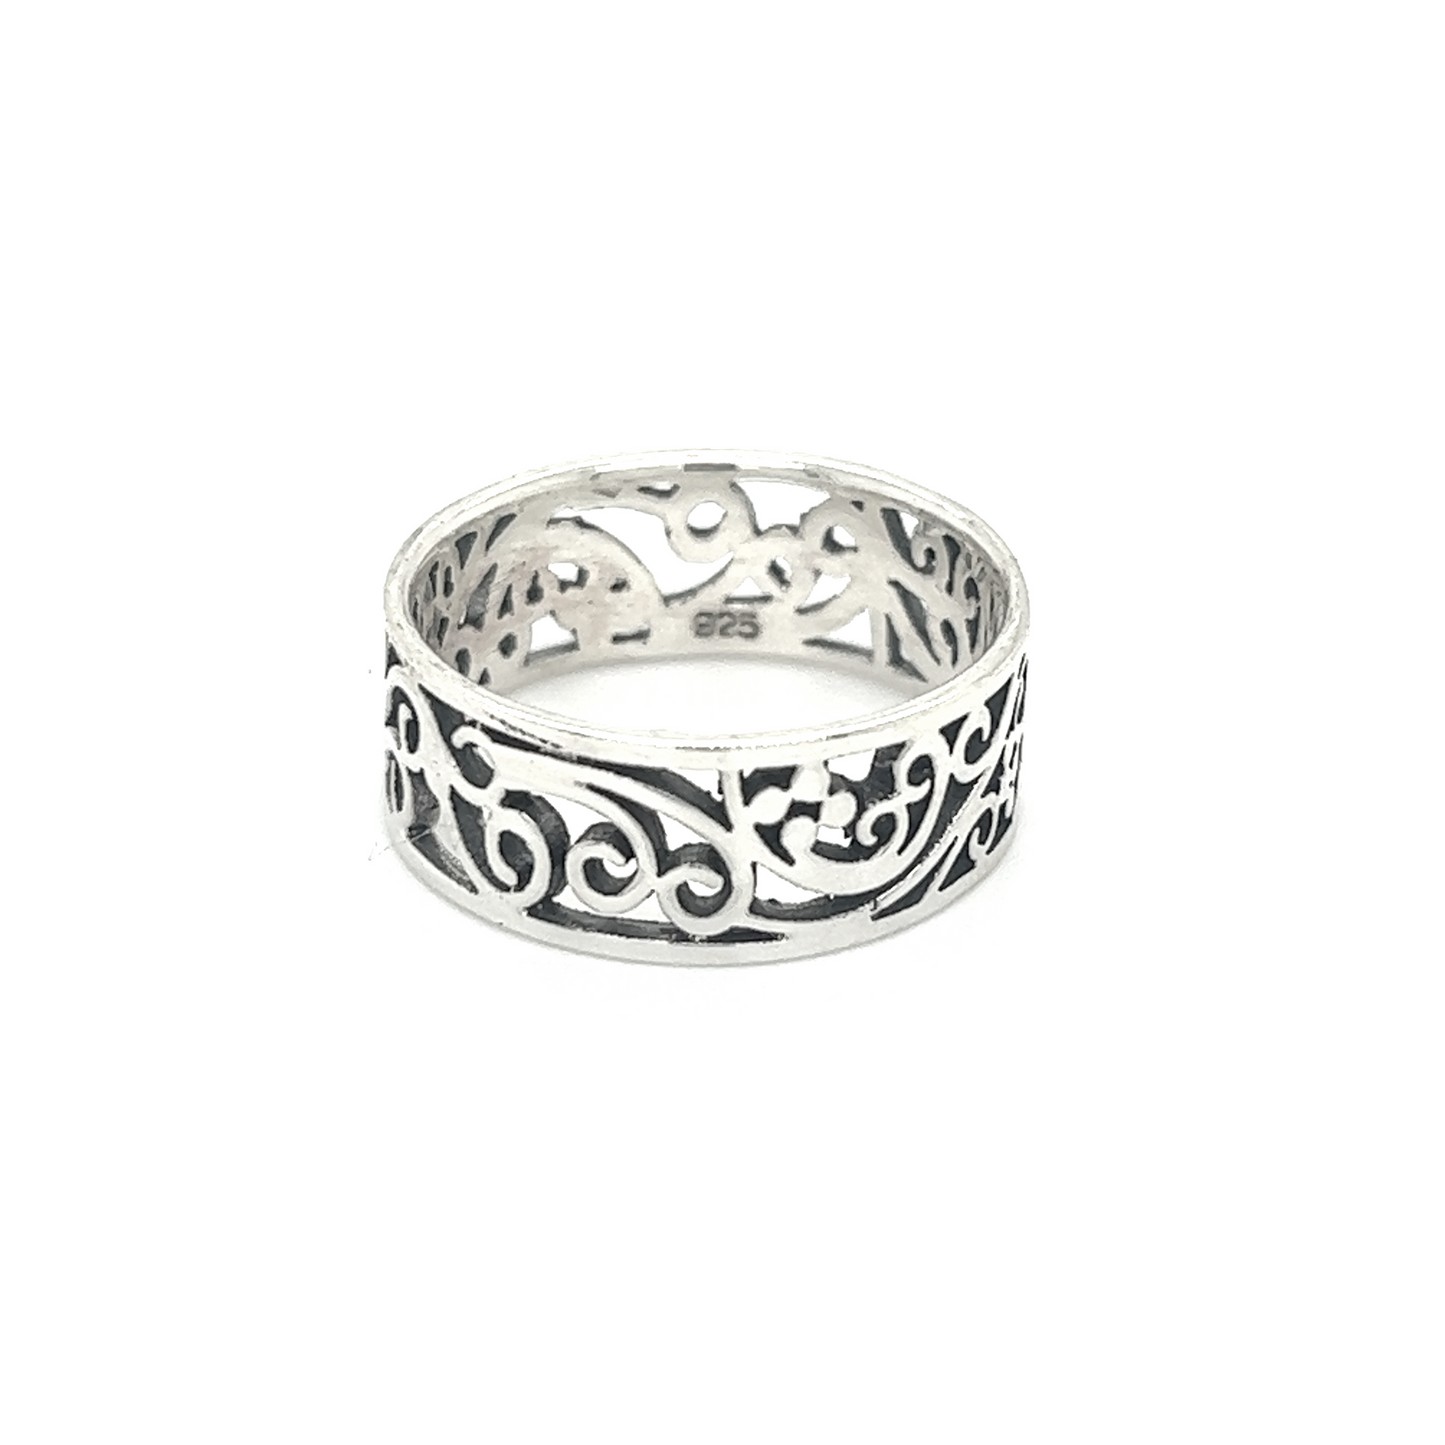 A stunning sterling silver ring with an ornate Thick Filigree Square Band.